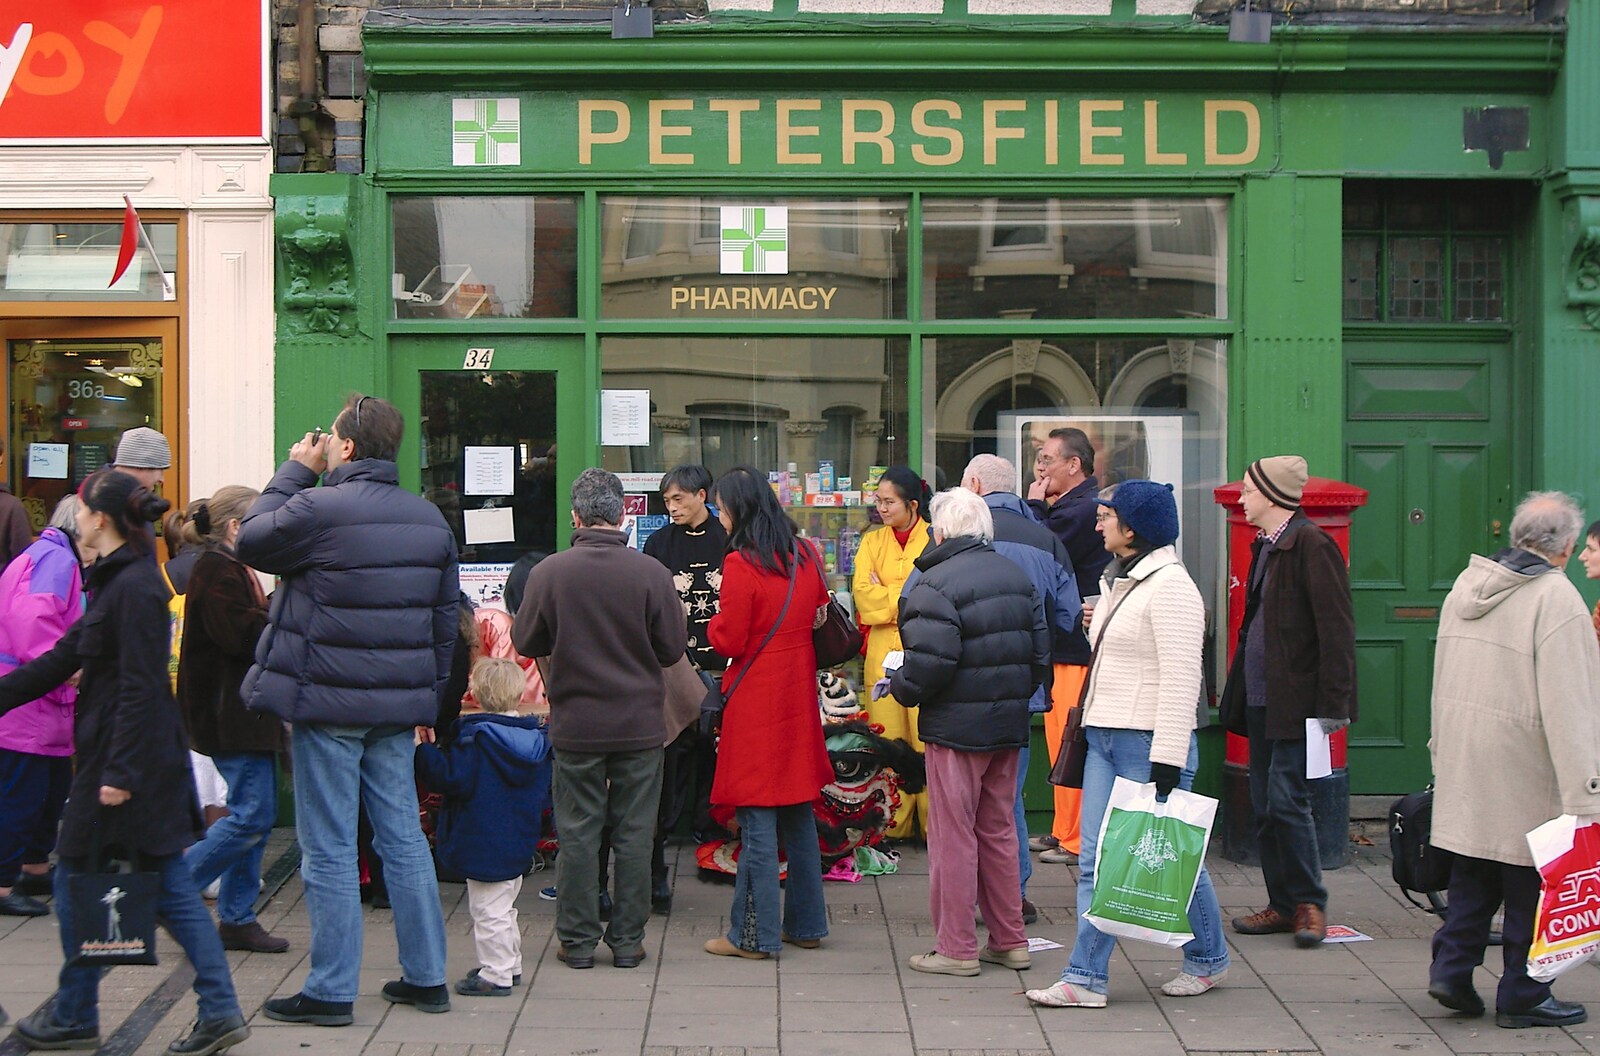 Outside Petersfield Pharmacy from The Winter Fair, Mill Road, Cambridge - 2nd December 2006